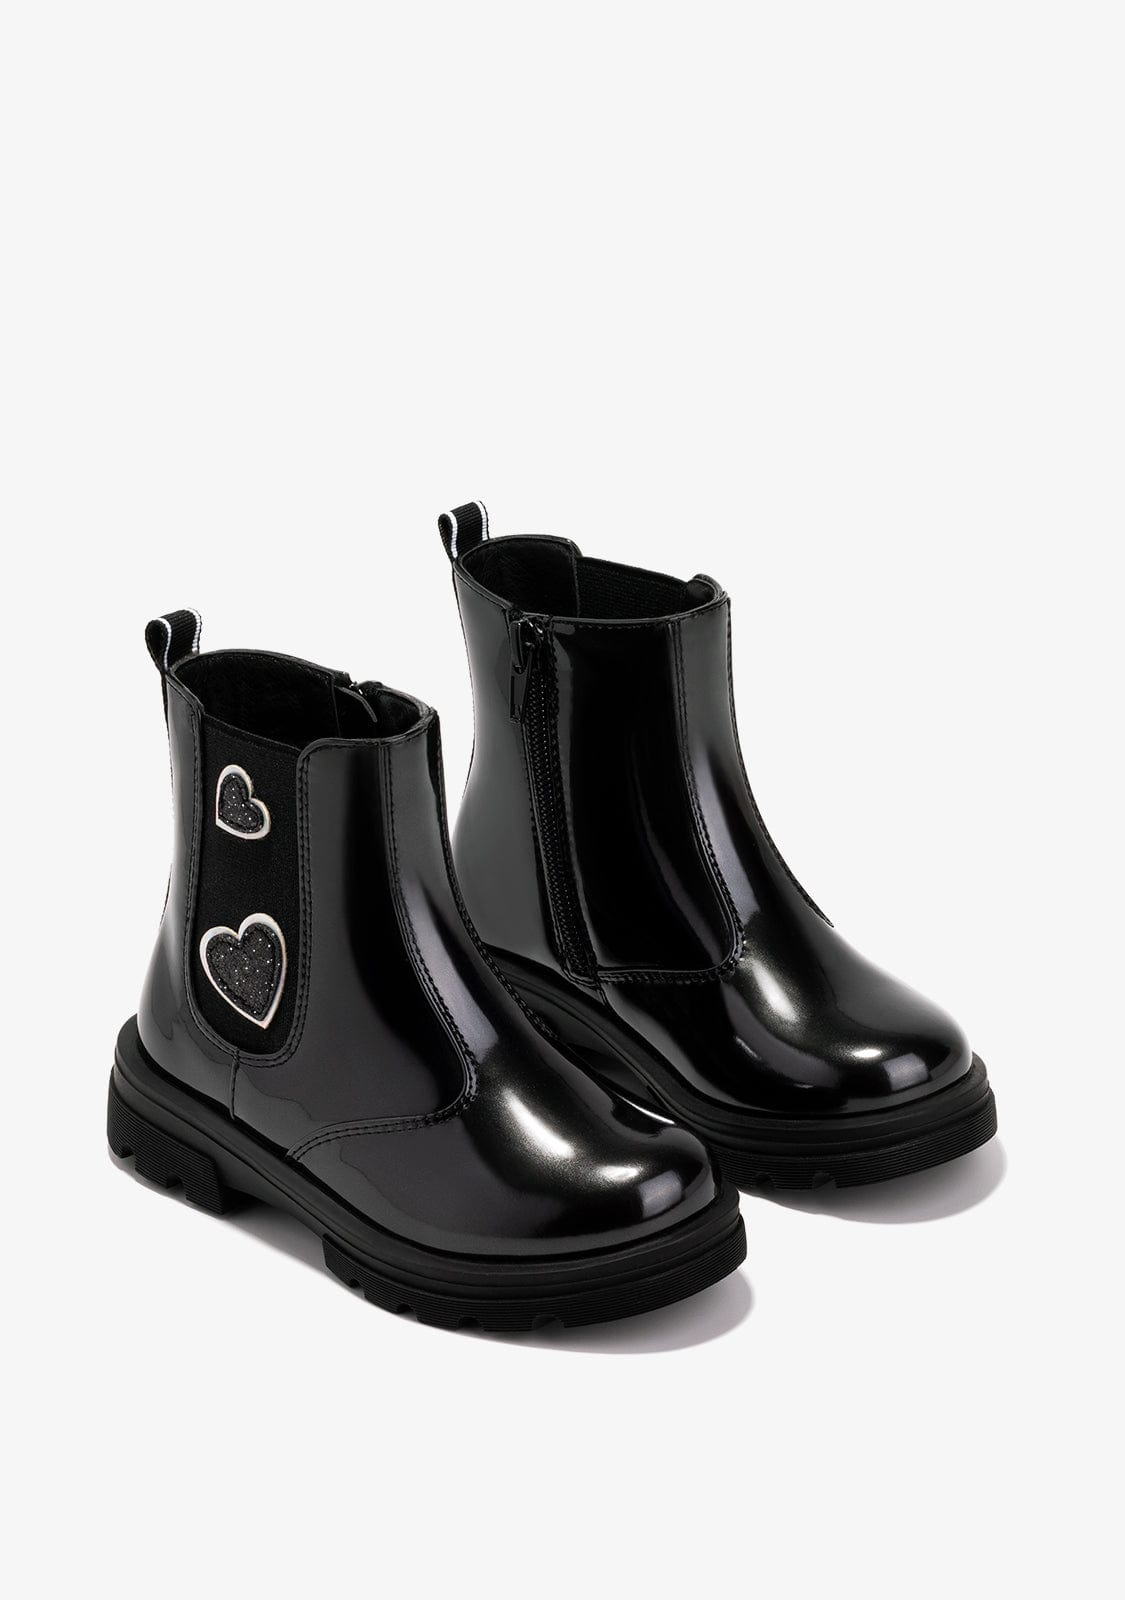 CONGUITOS Shoes Girl's Black Hearts Ankle Boots Patent Leather